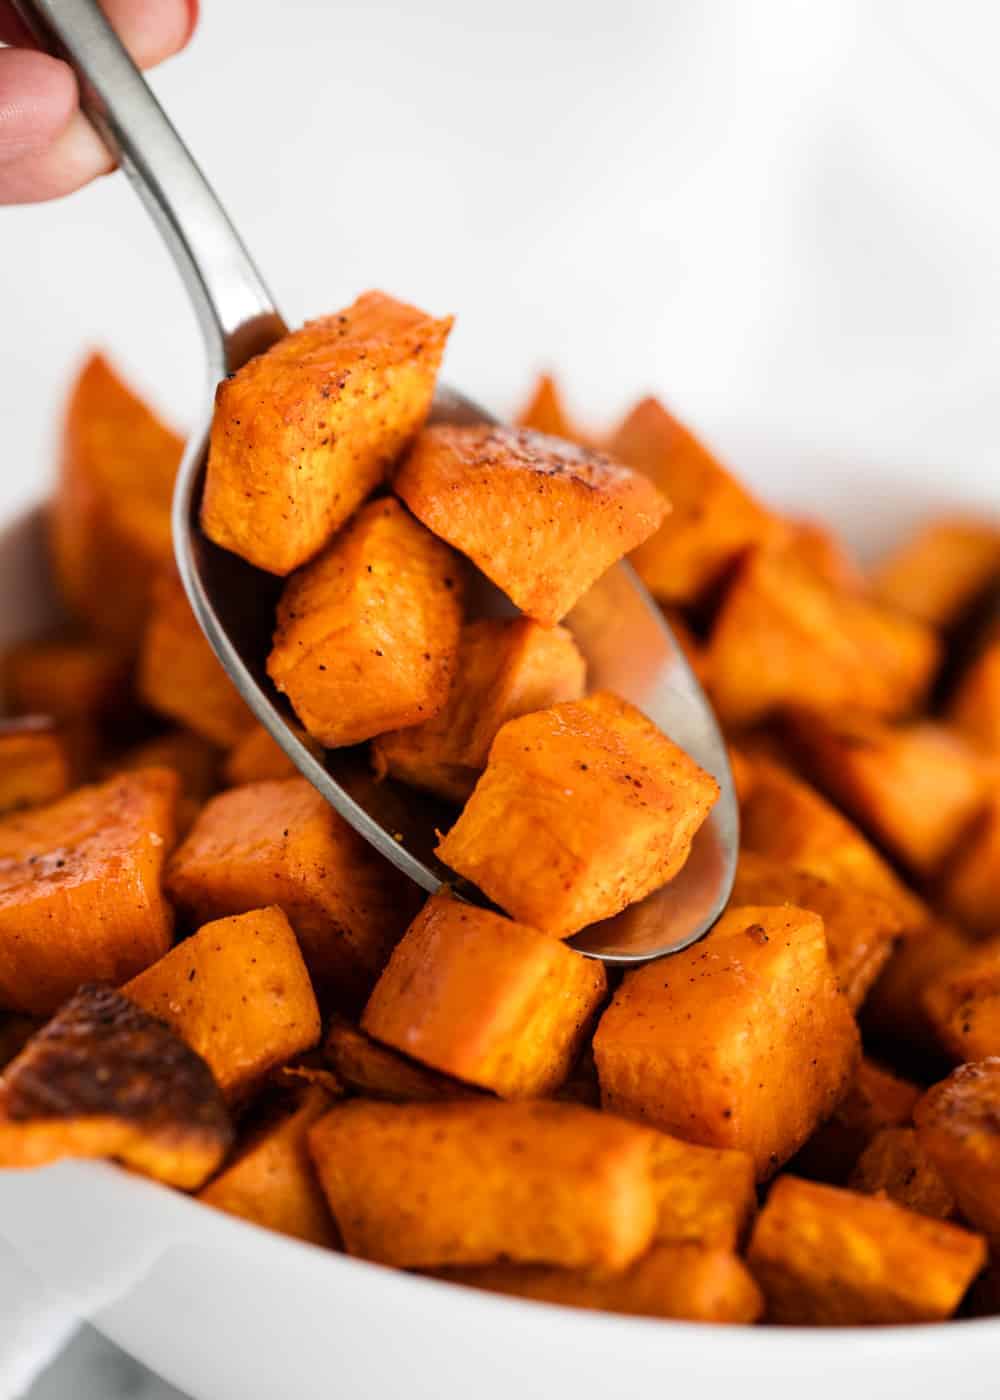 Scooping up roasted sweet potatoes with a spoon.